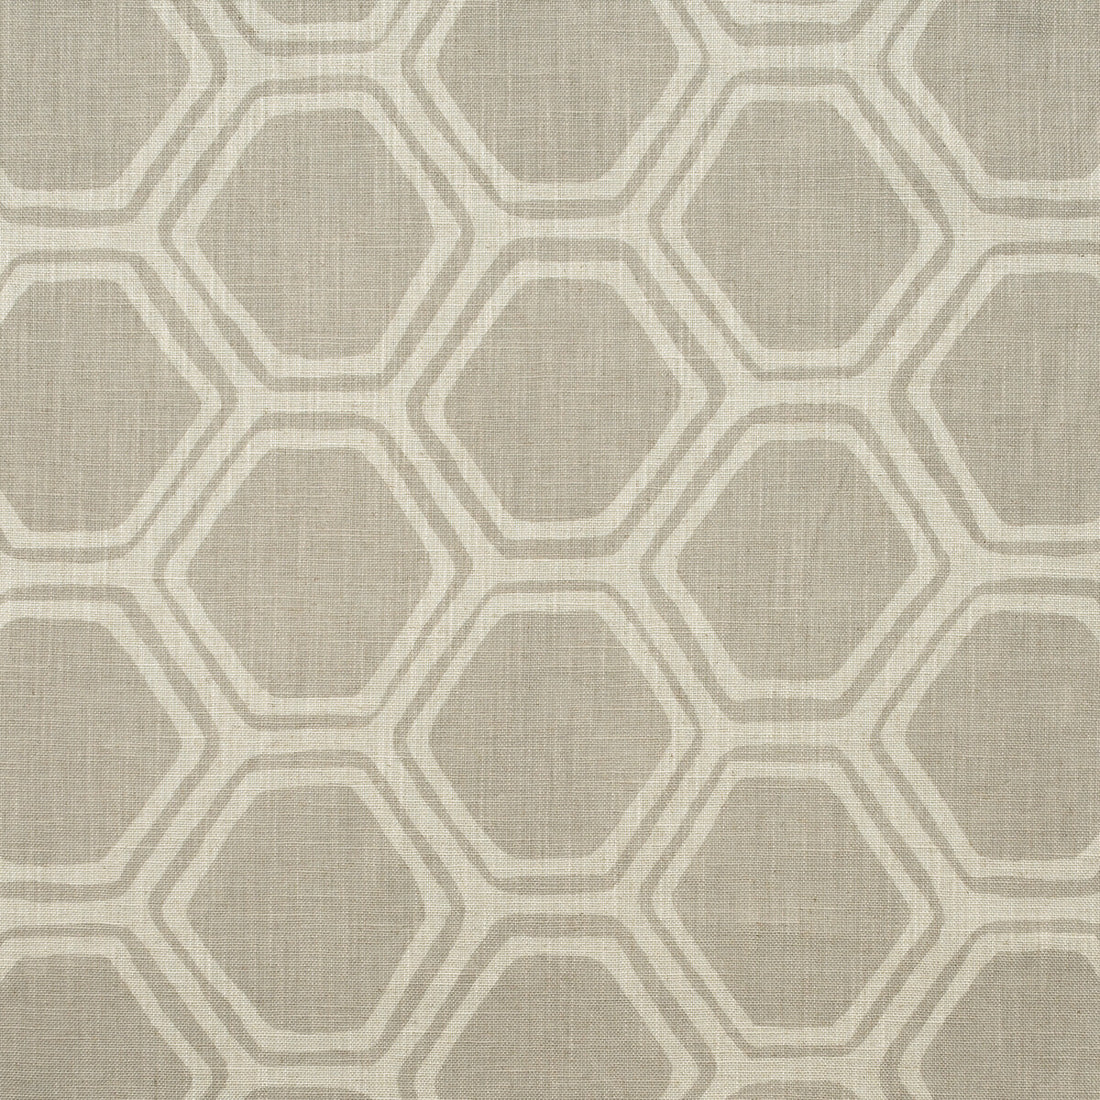 Pergola fabric in cloud color - pattern AM100408.106.0 - by Kravet Couture in the Andrew Martin The Secret Garden collection